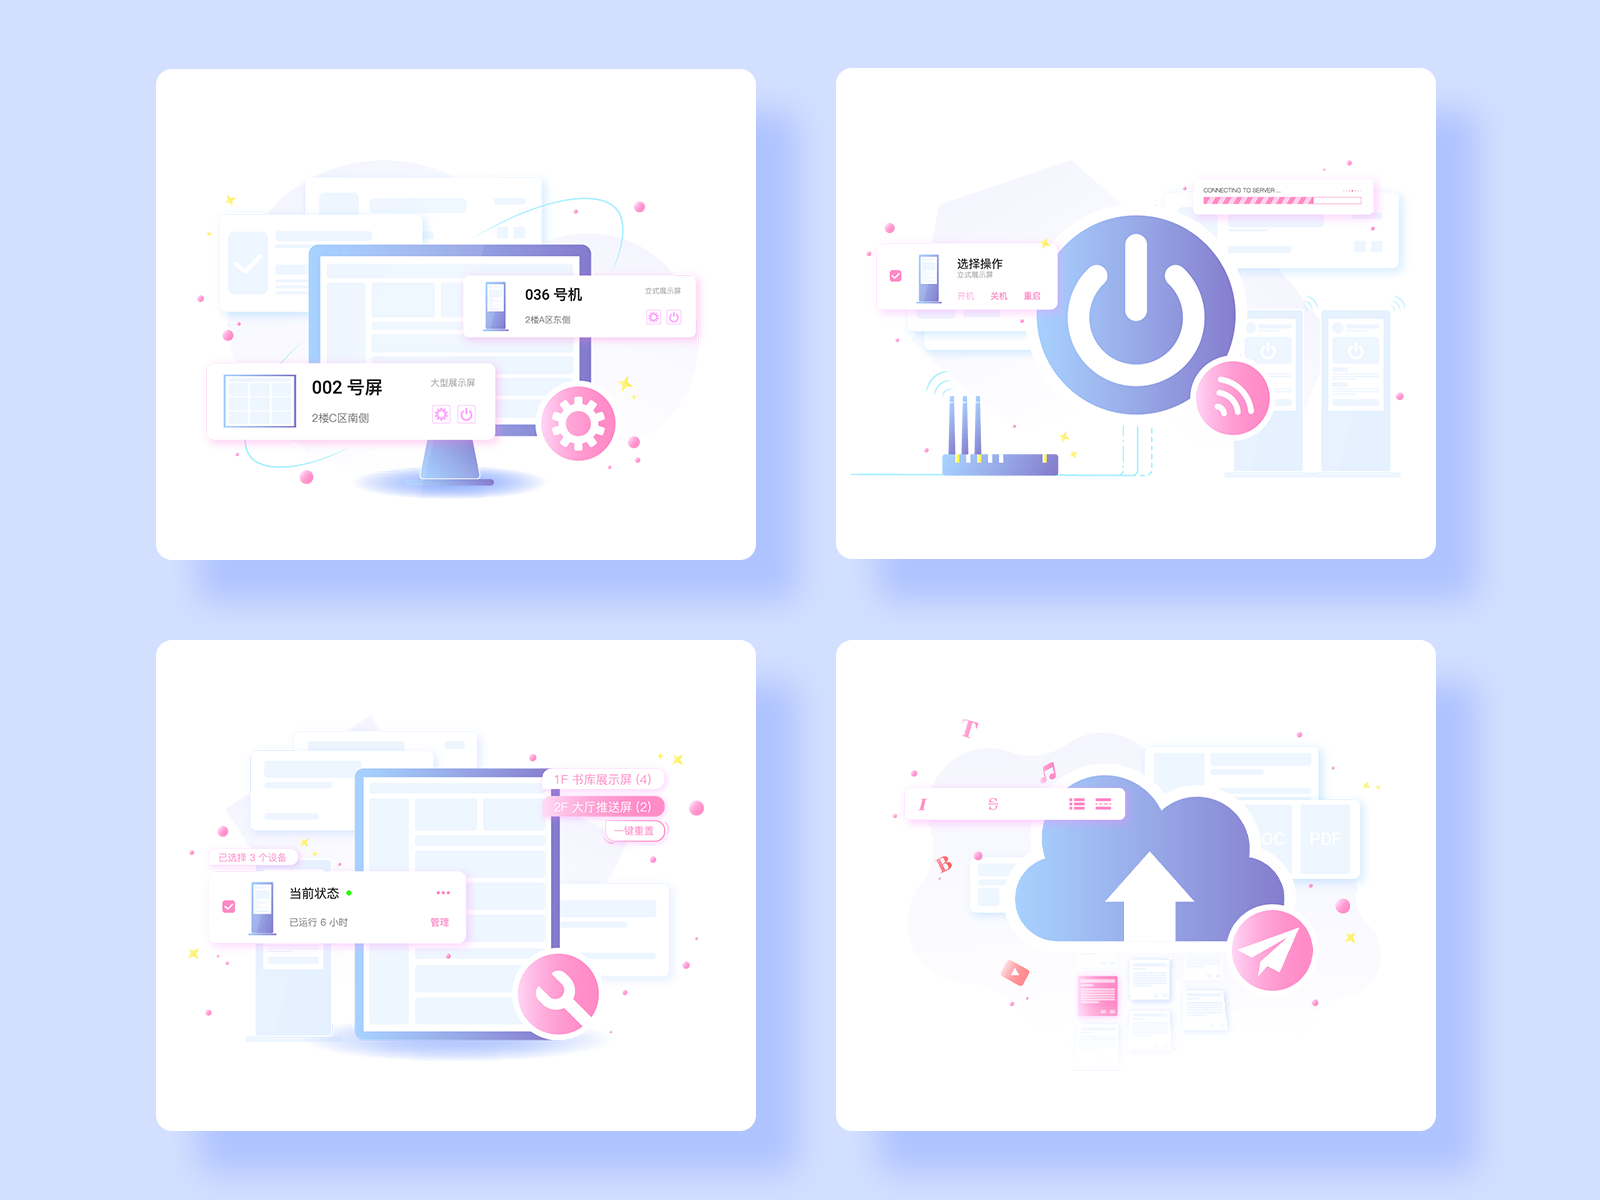 Illustration series 05 by Halcyon Duan on Dribbble